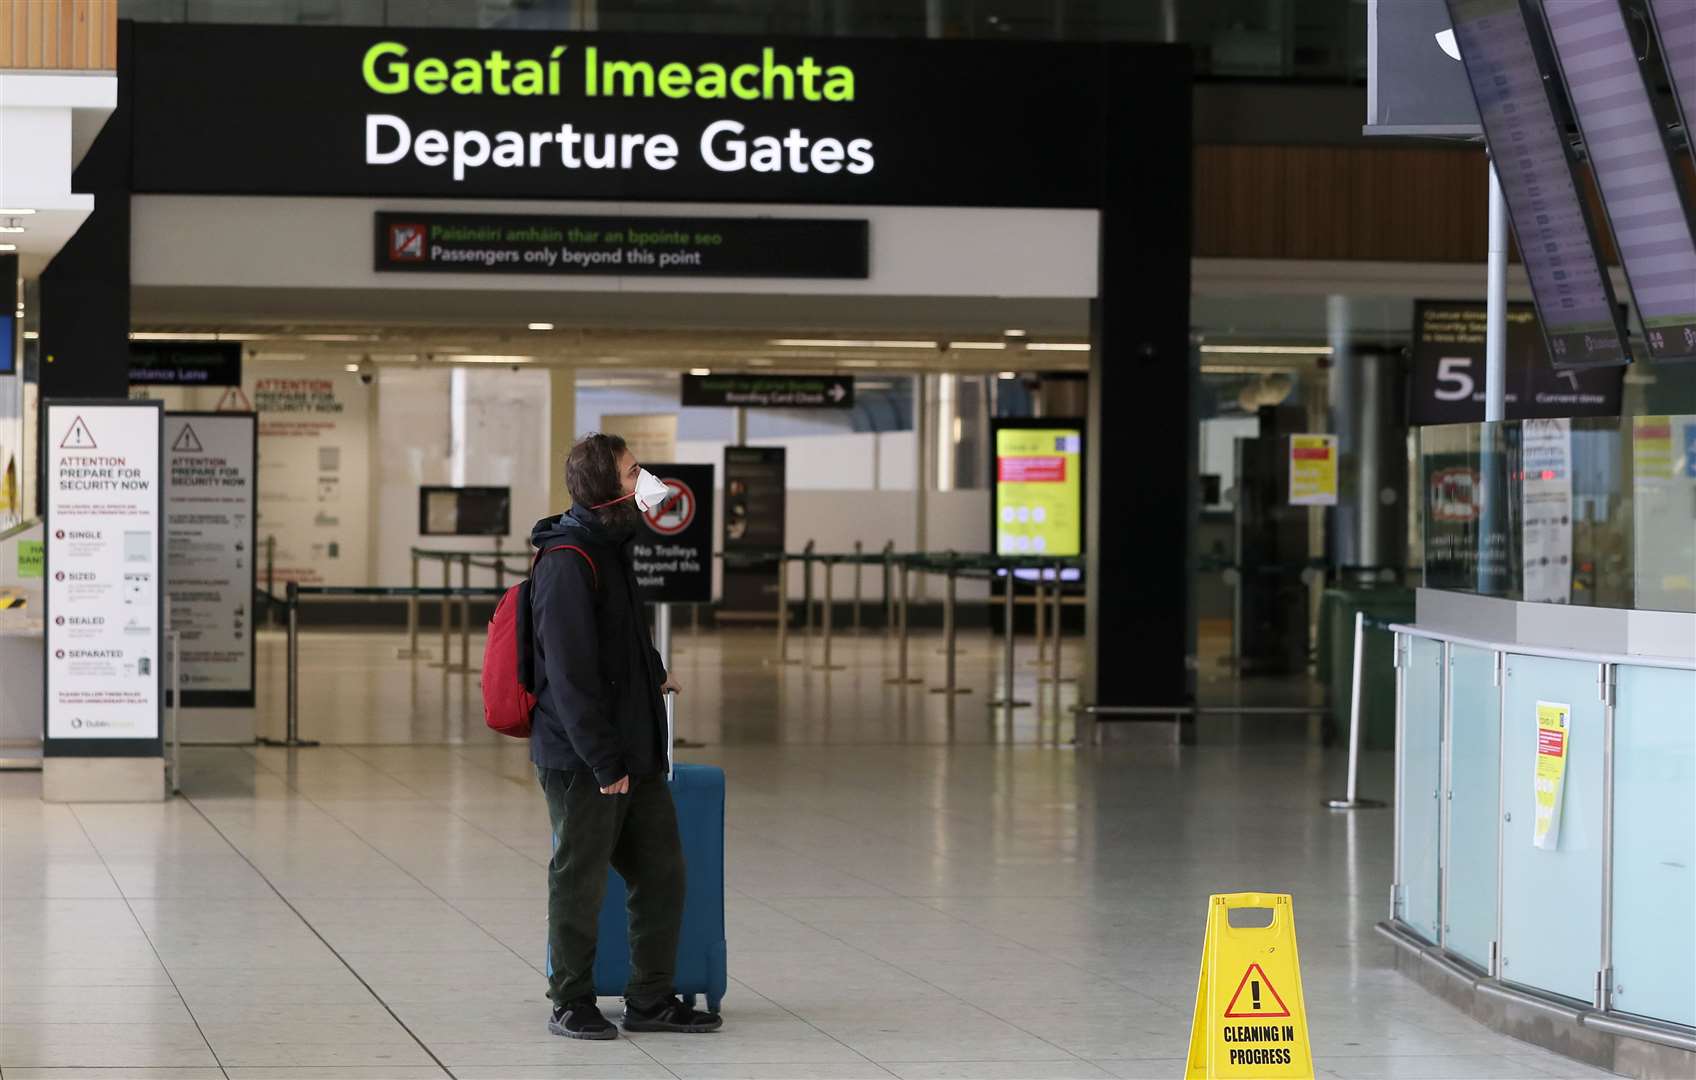 The travel industry is anticipating a spike in demand once coronavirus restrictions ease (Brian Lawless/PA)